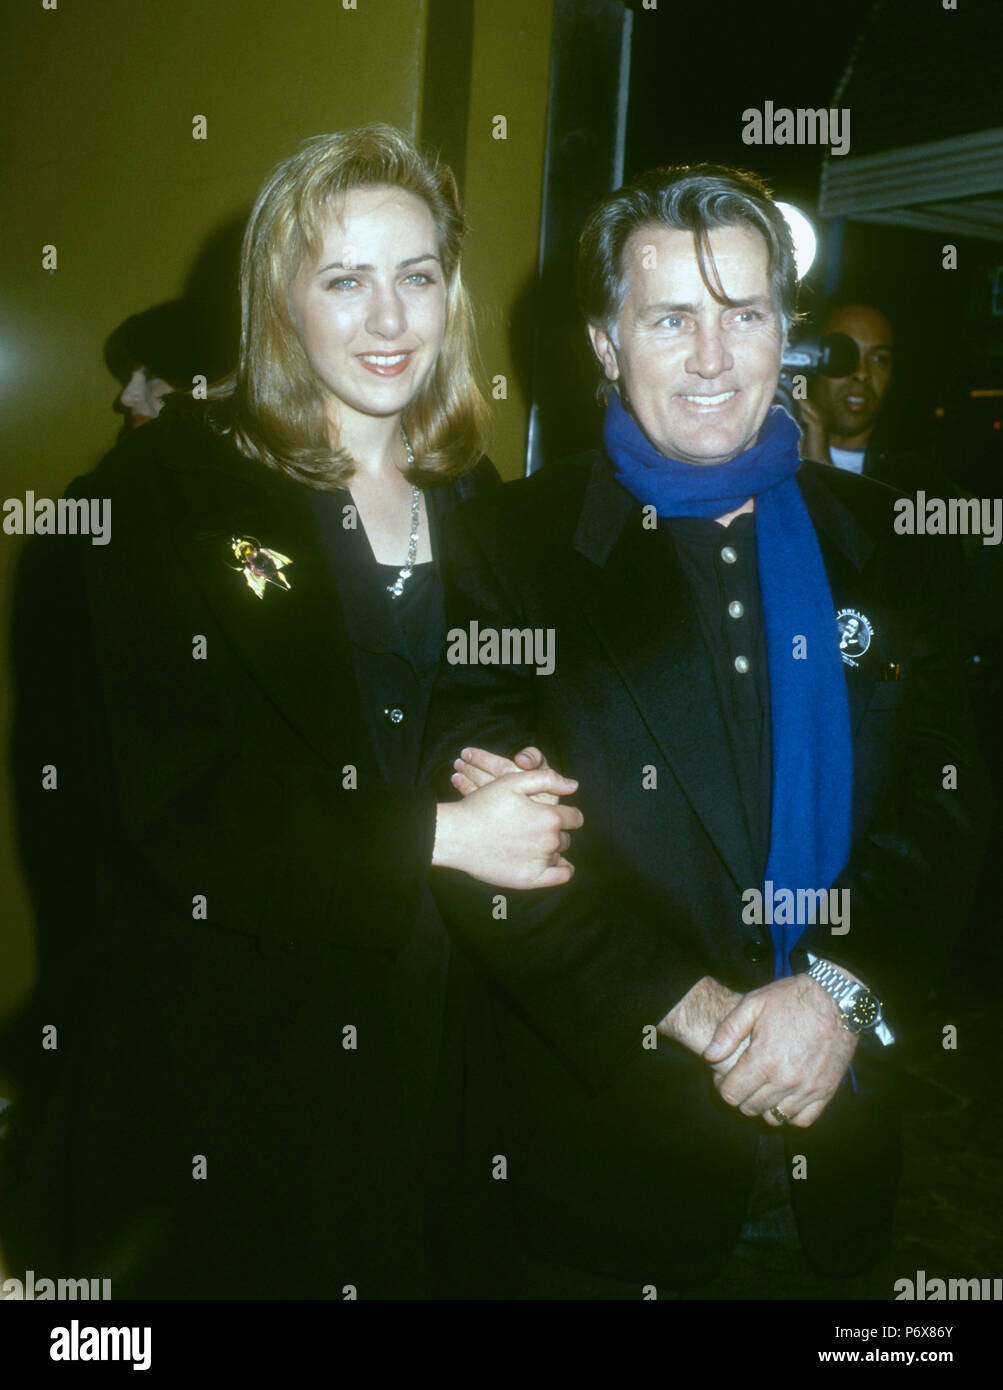 LOS ANGELES, CA - JANUARY 14: (L-R) Renee Sheen and father Actor Martin Sheen attend 'Hearts of Darkness: A Filmmaker's Apocalypse' Westwood Premiere on January 14, 1992 at the Mann Village Theatre in Westwood, Los Angeles, California. Photo by Barry King/Alamy Stock Photo Stock Photo